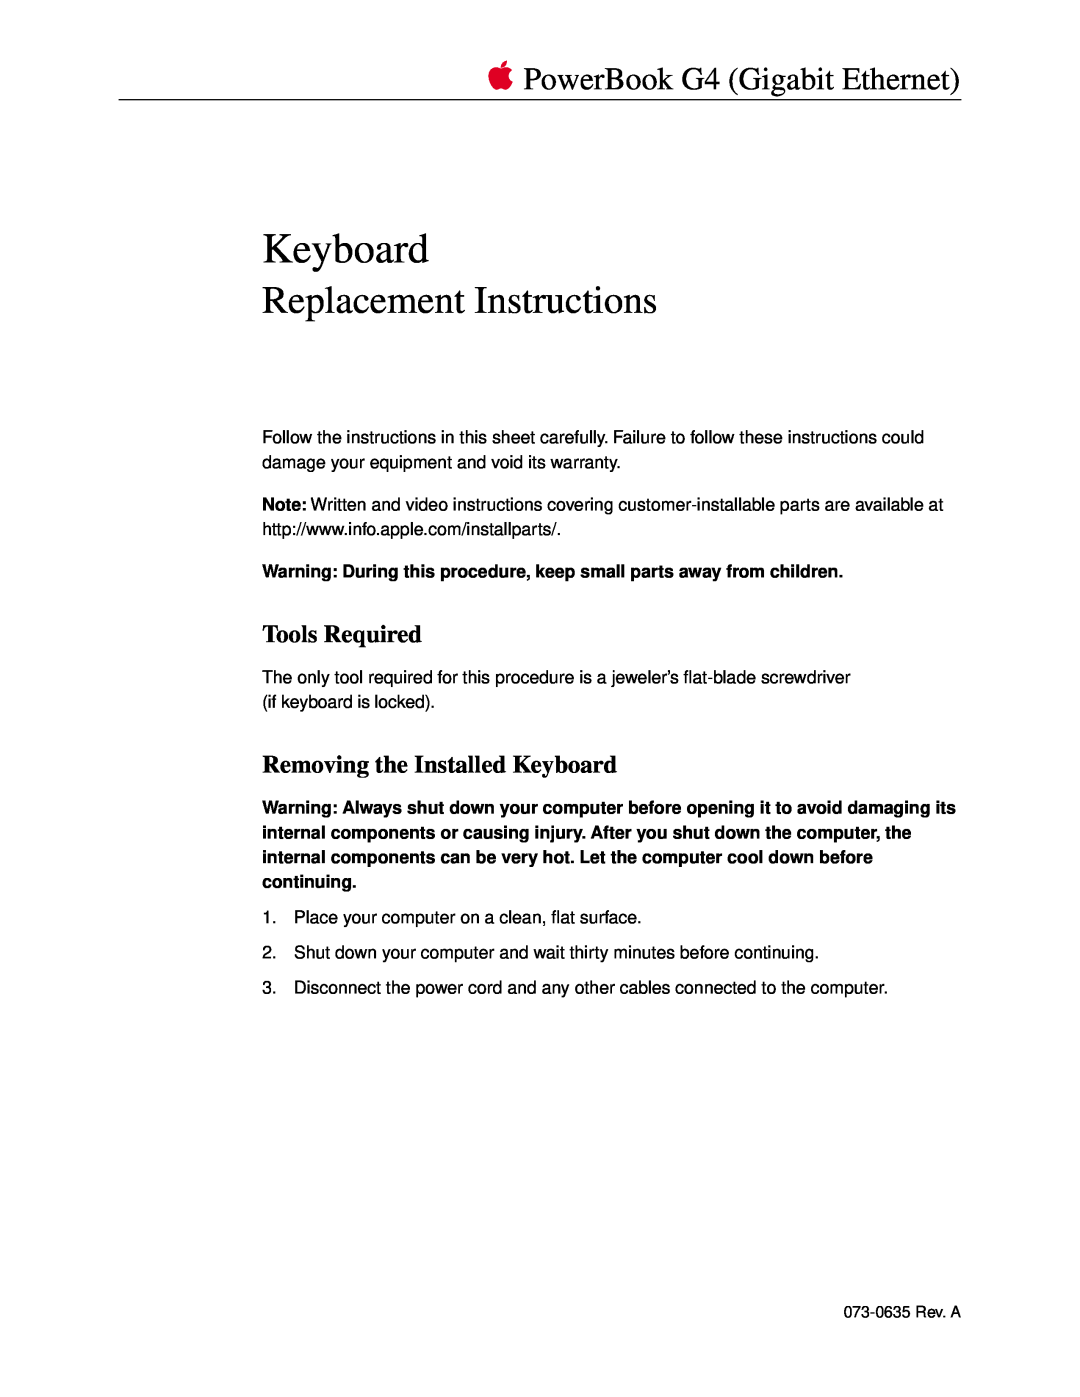 Apple 073-0635 warranty Tools Required, Removing the Installed Keyboard, Replacement Instructions 